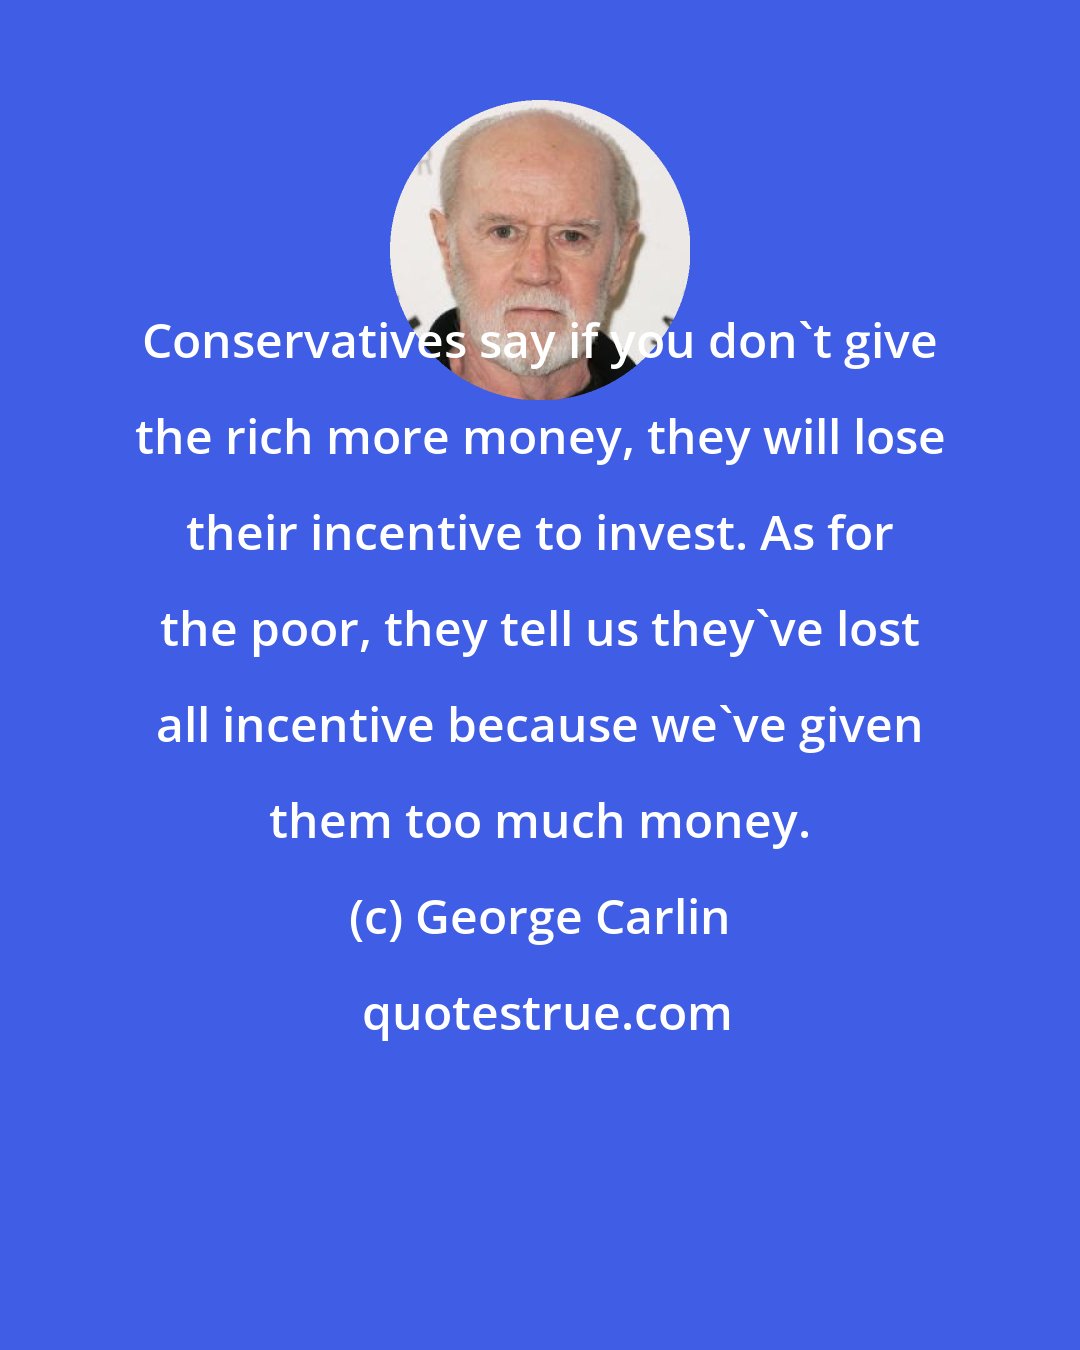 George Carlin: Conservatives say if you don't give the rich more money, they will lose their incentive to invest. As for the poor, they tell us they've lost all incentive because we've given them too much money.